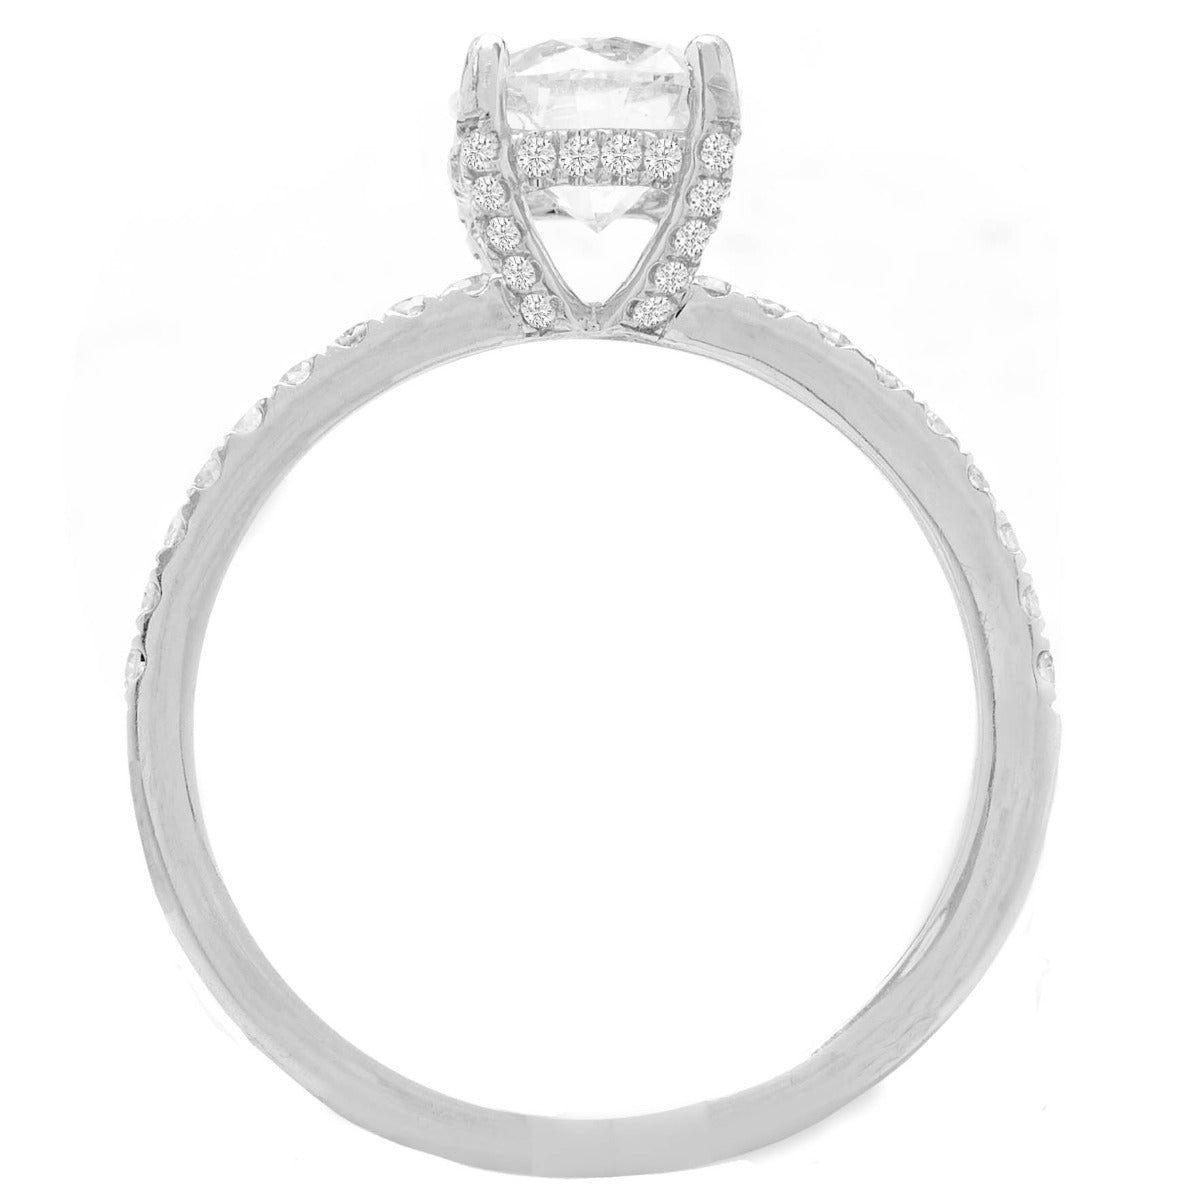 Remily Hidden Halo Diamond Engagement Ring in 14K White Gold; 1.50 cwt